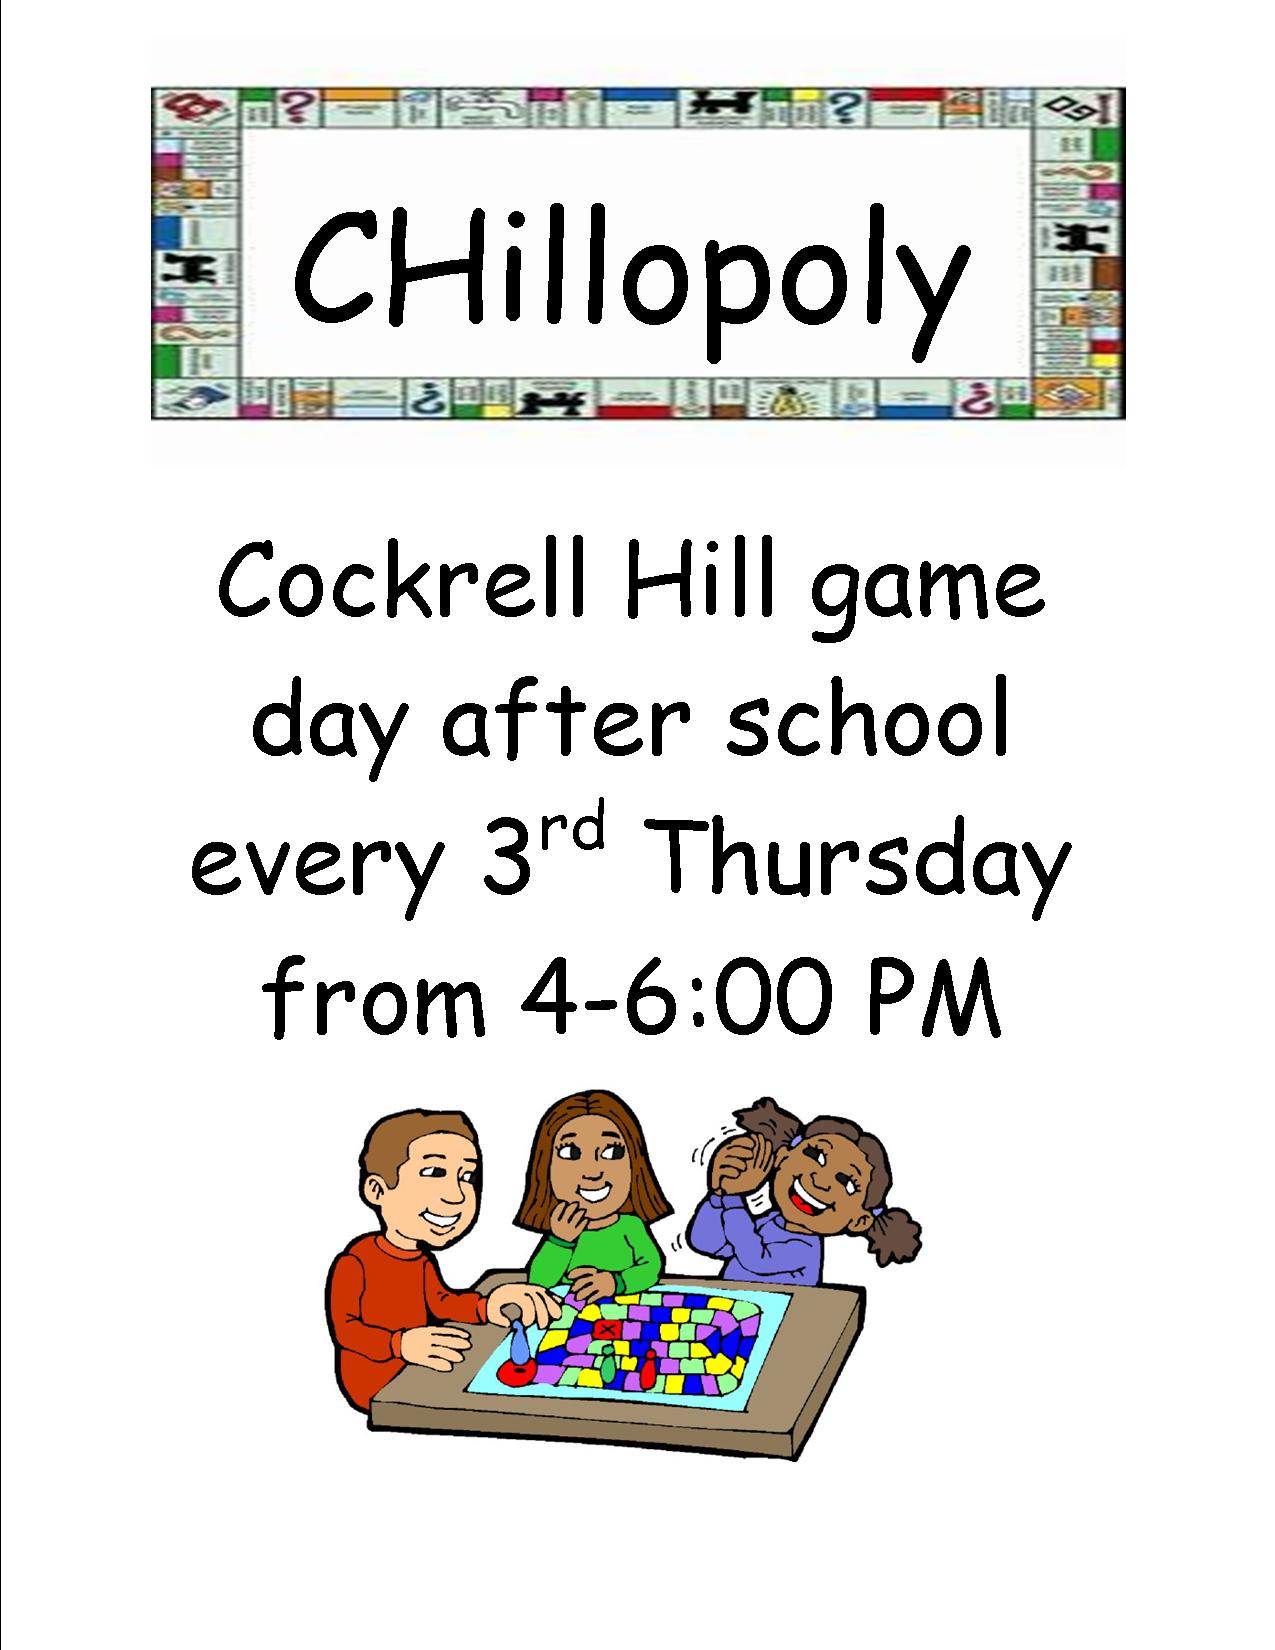 CHillopoly